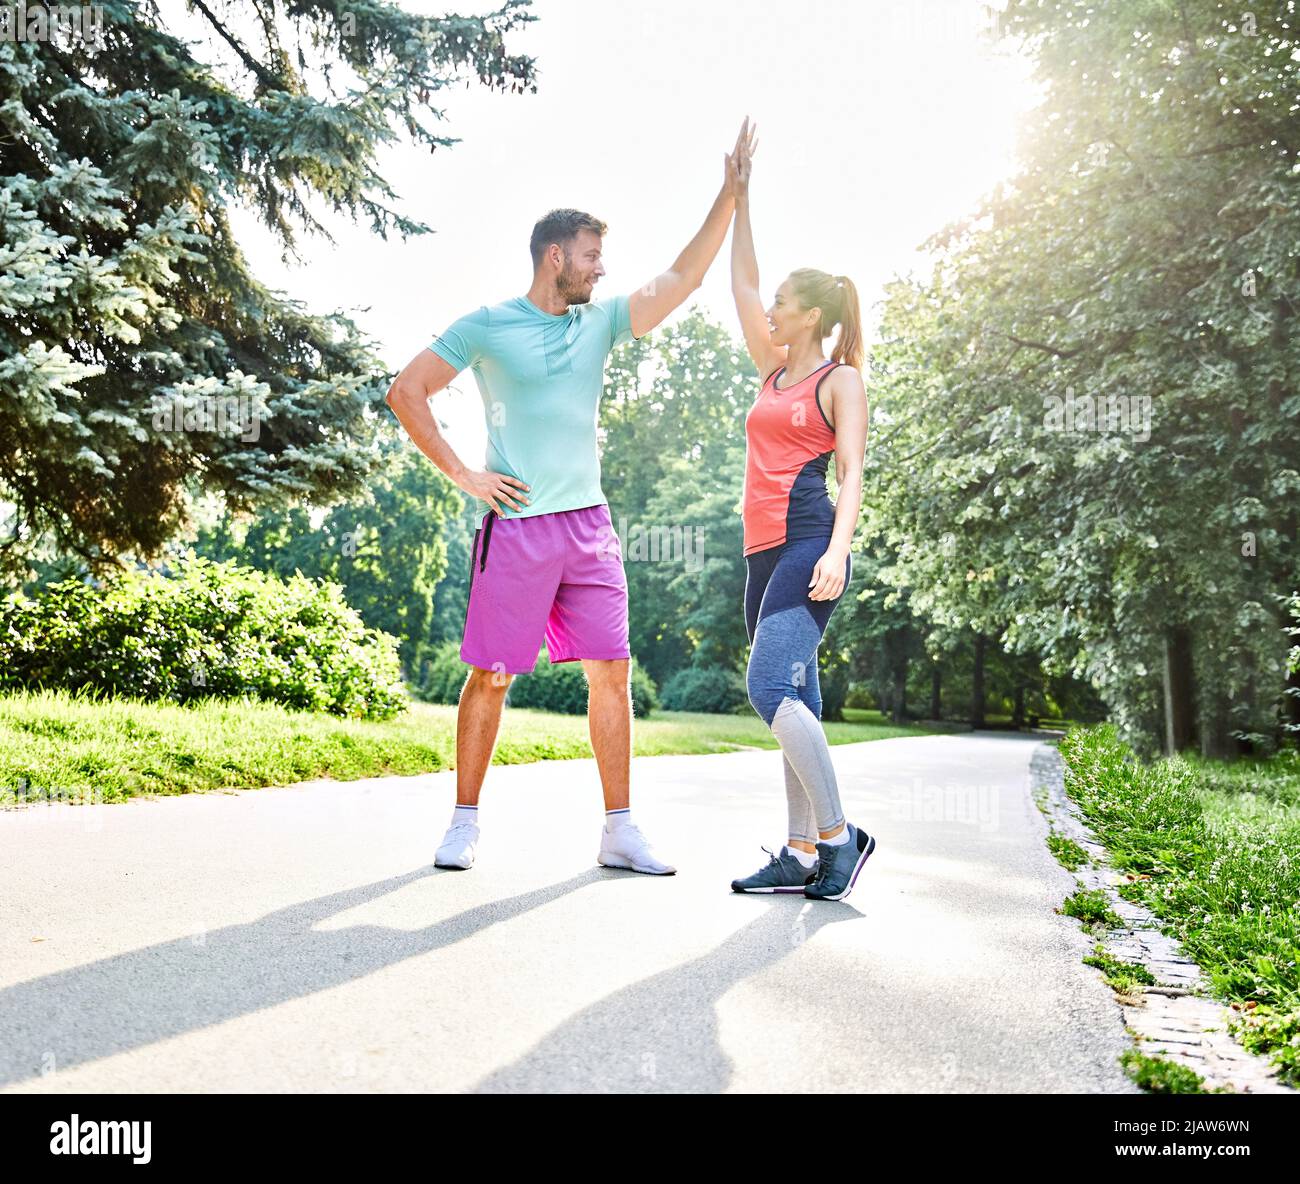 fitness woman park exercise lifestyle outdoor sport healthy couple nature active young fit training athlete Stock Photo